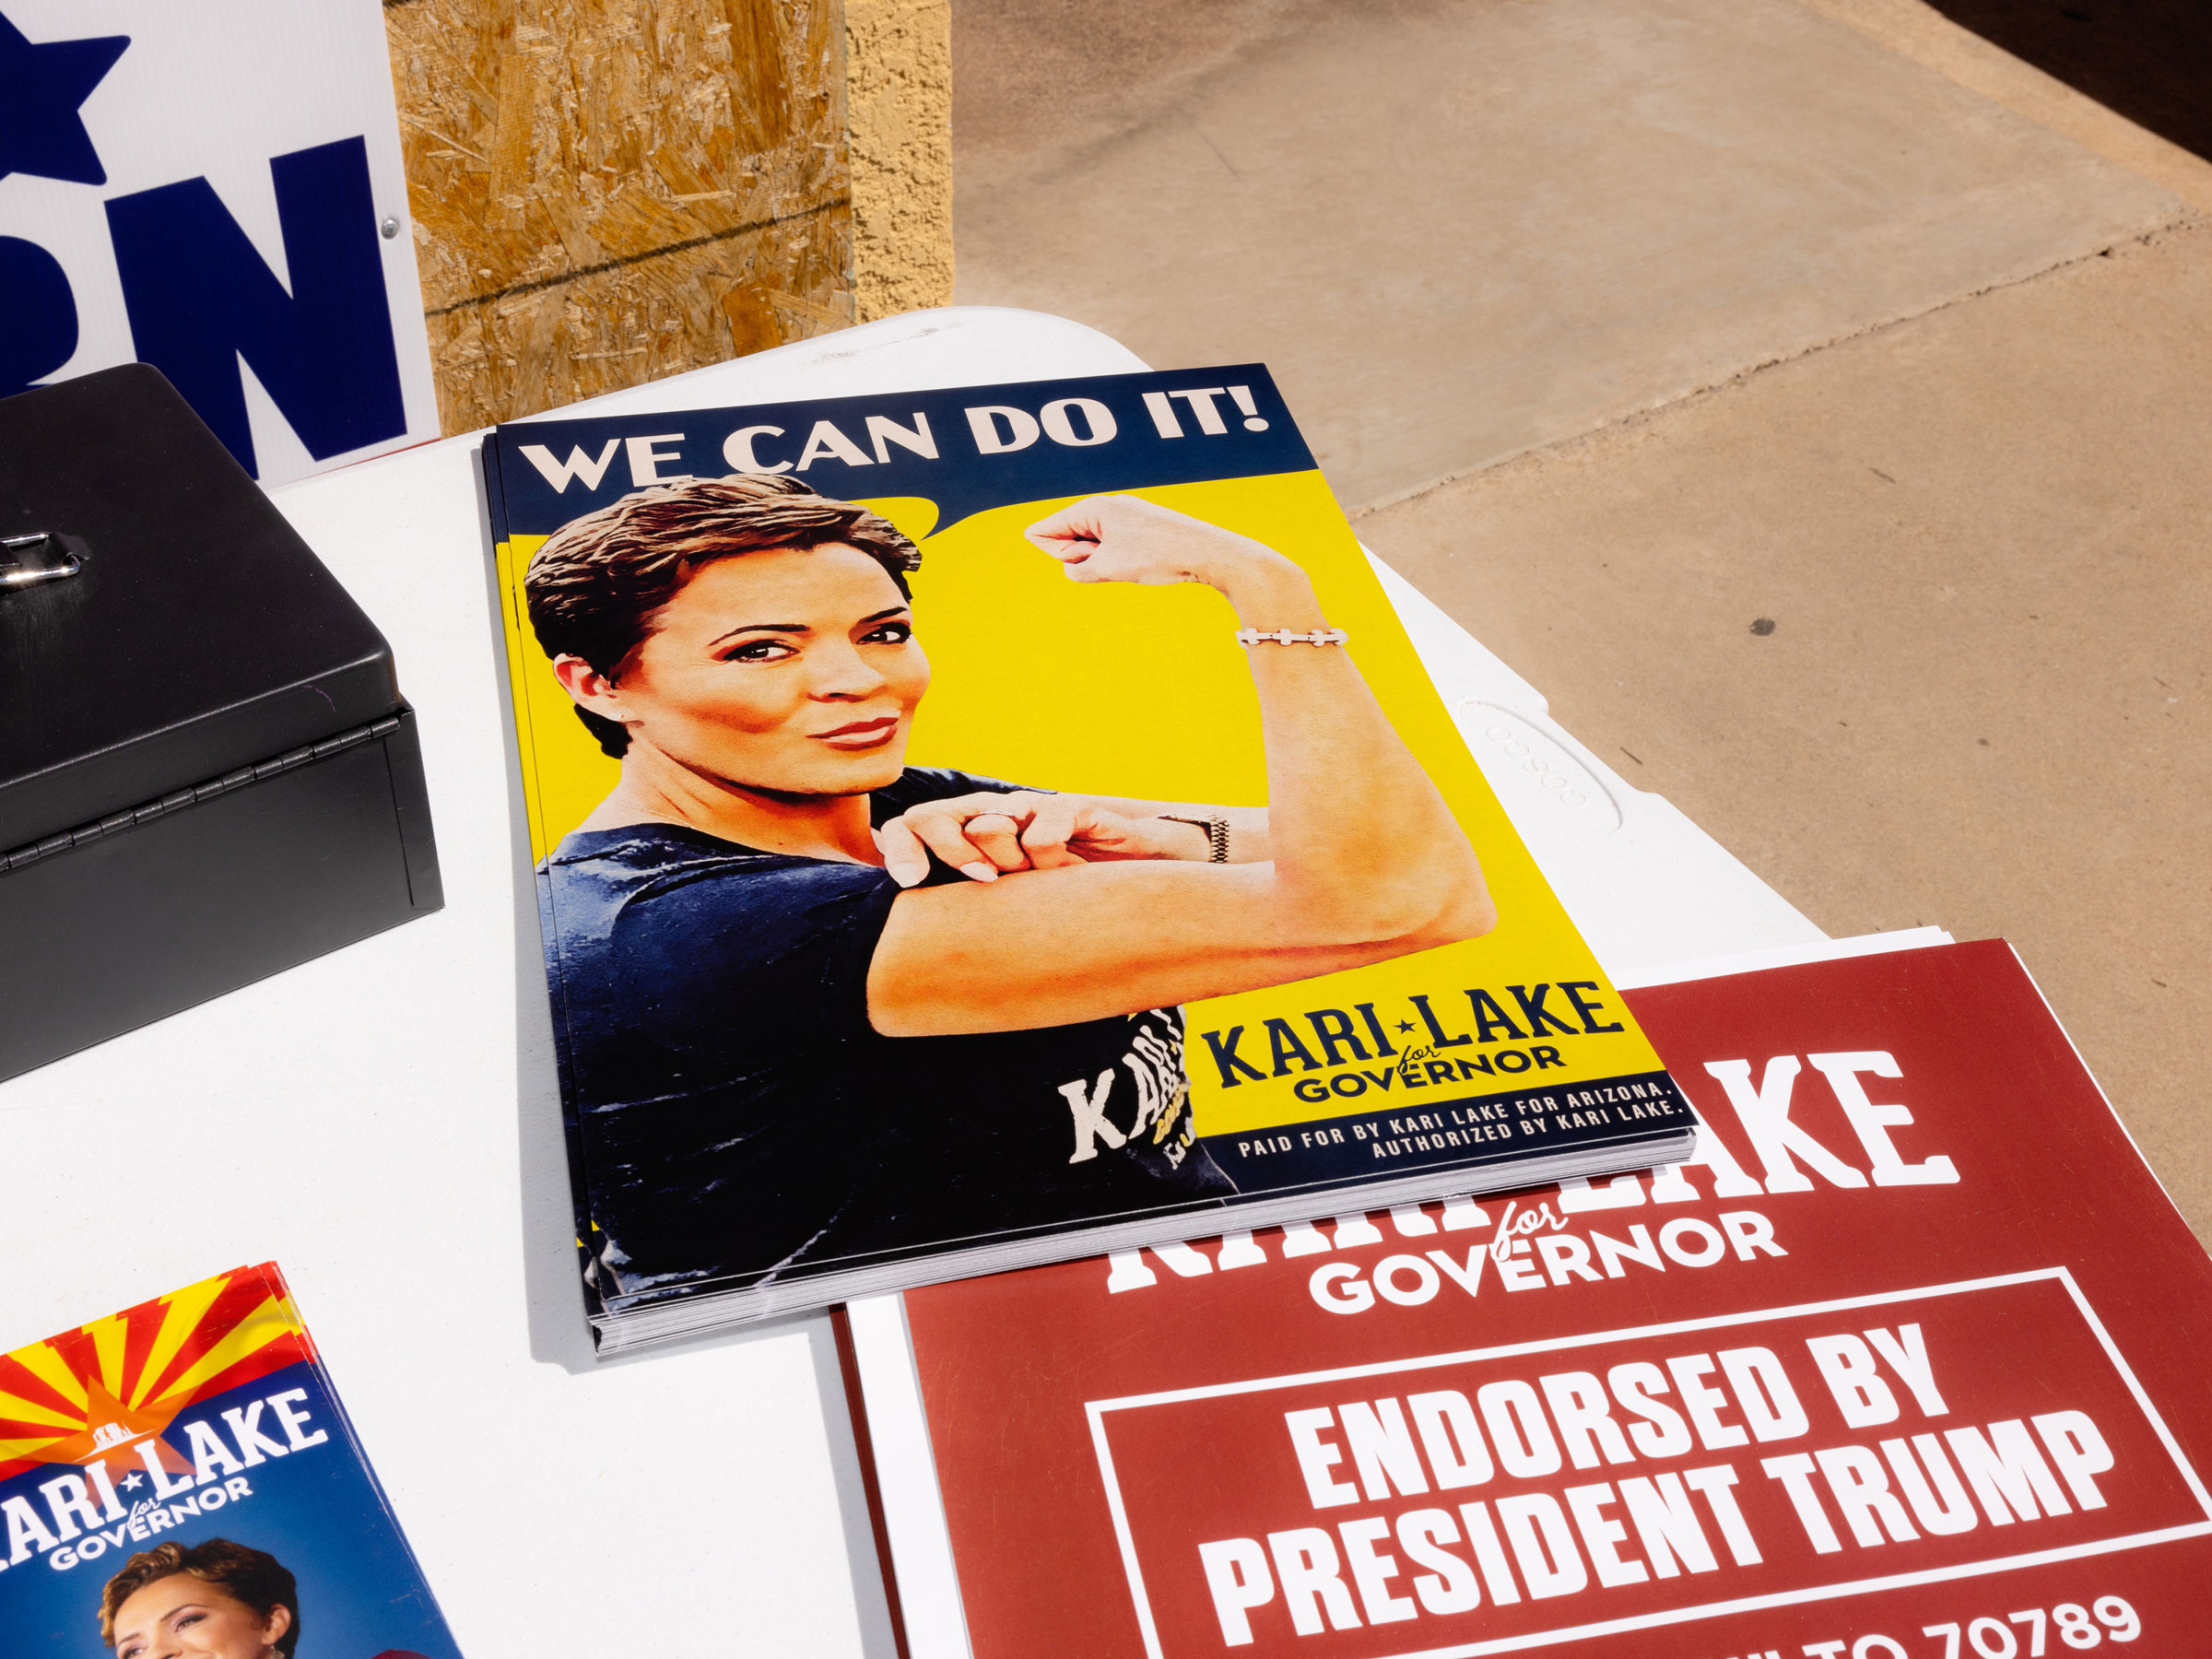 Campaign materials for Kari Lake at an event in Sierra Vista, Ariz., March 31, 2022. (Cassidy Araiza—The New York Times/Redux)